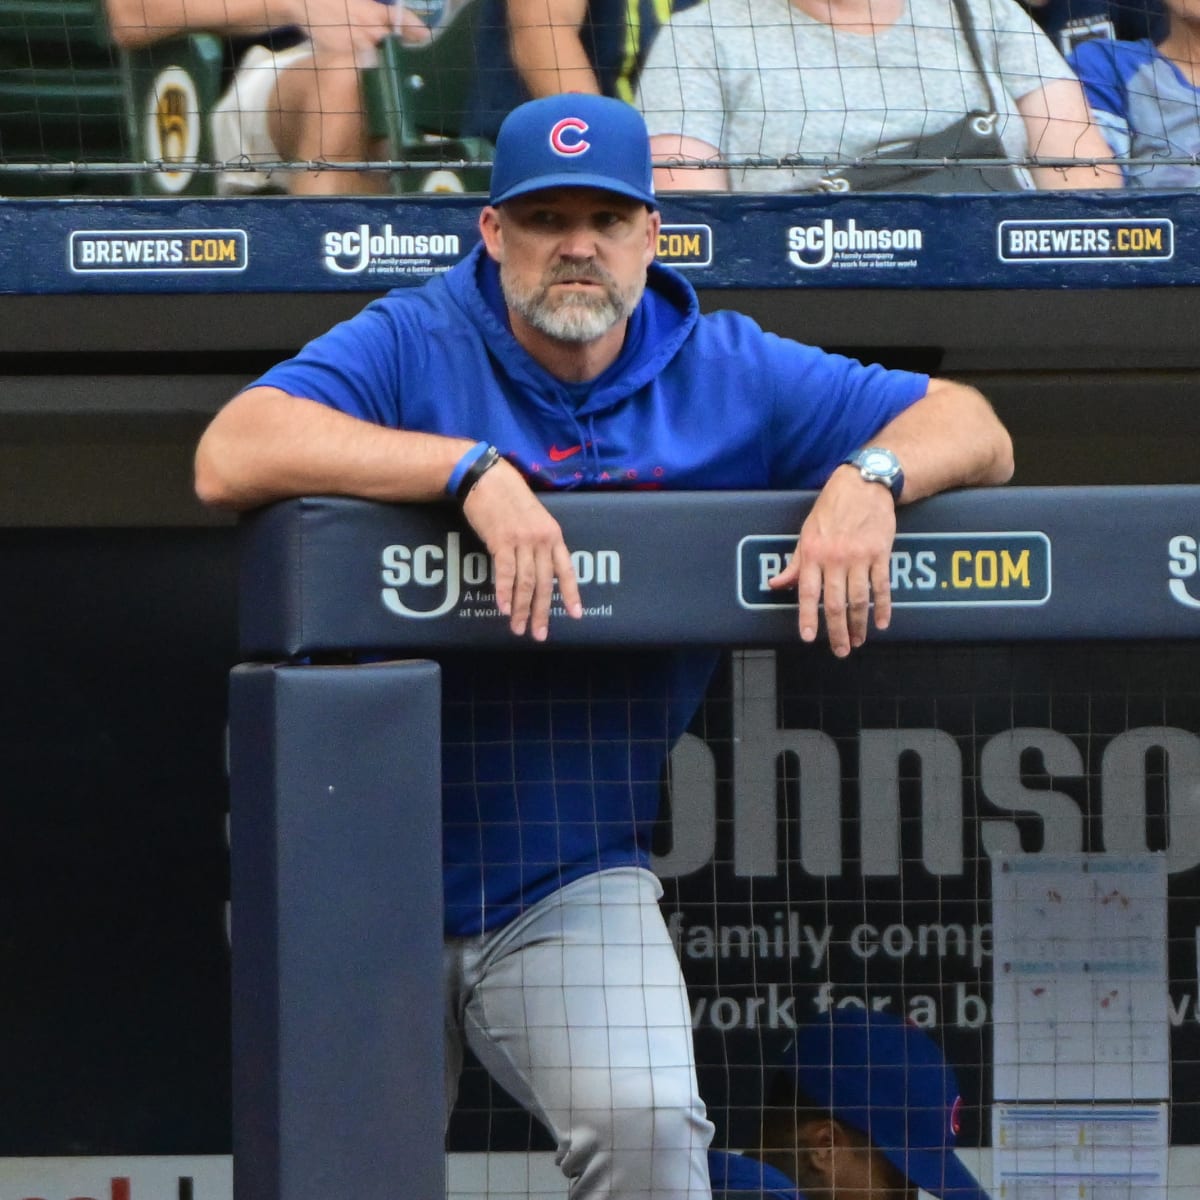 Cubs' David Ross managing after divorce with positive outlook - Chicago  Sun-Times